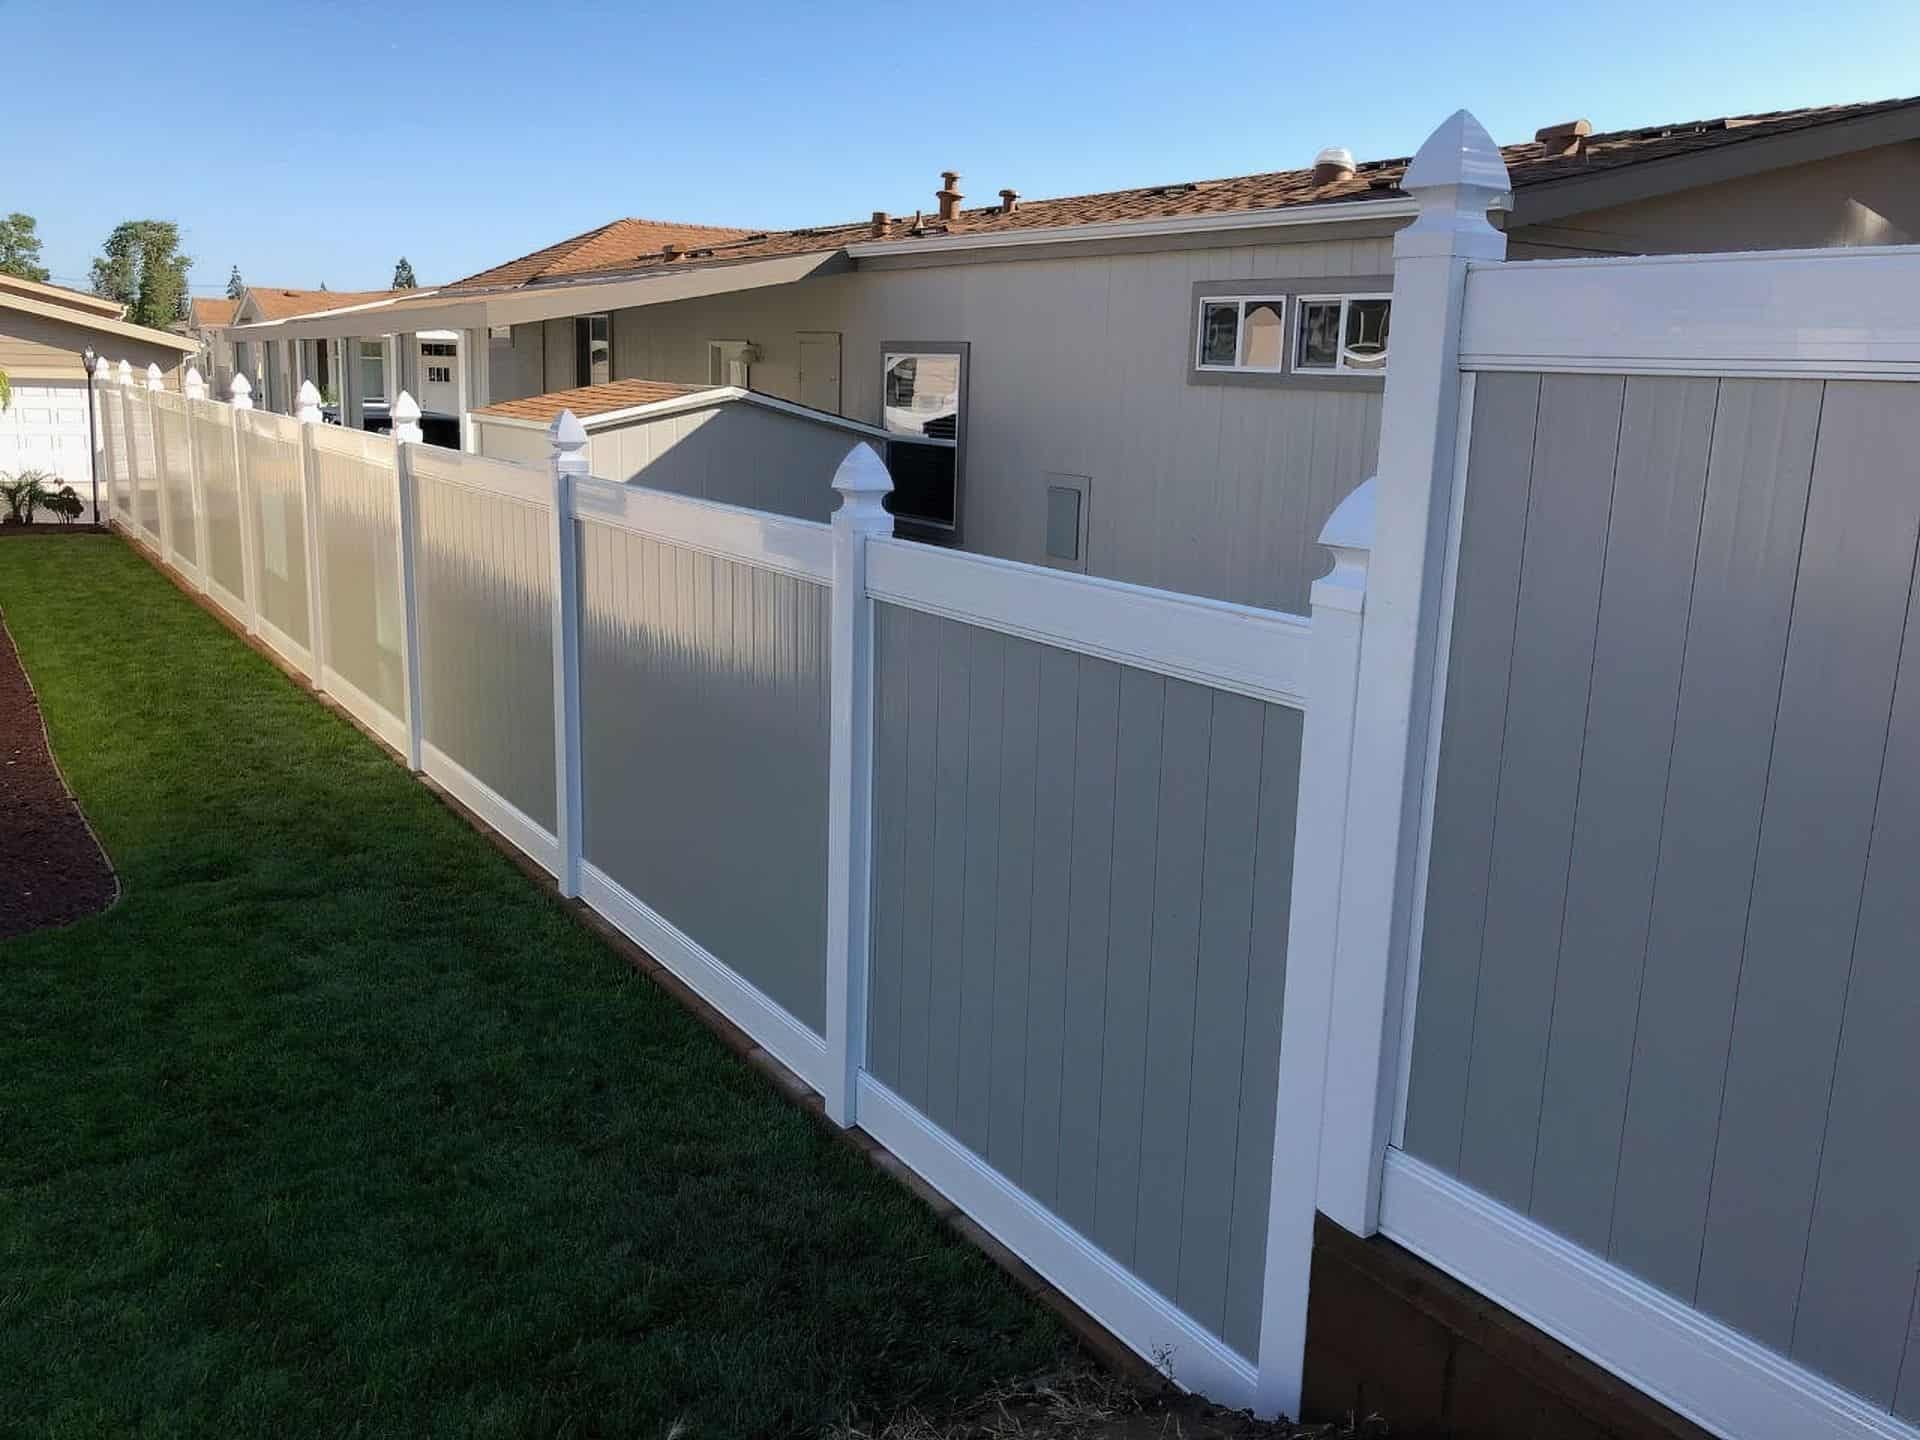 Vinyl privacy two-tone fence with gray center and white border surrounding an elevated backyard with a lush garden.